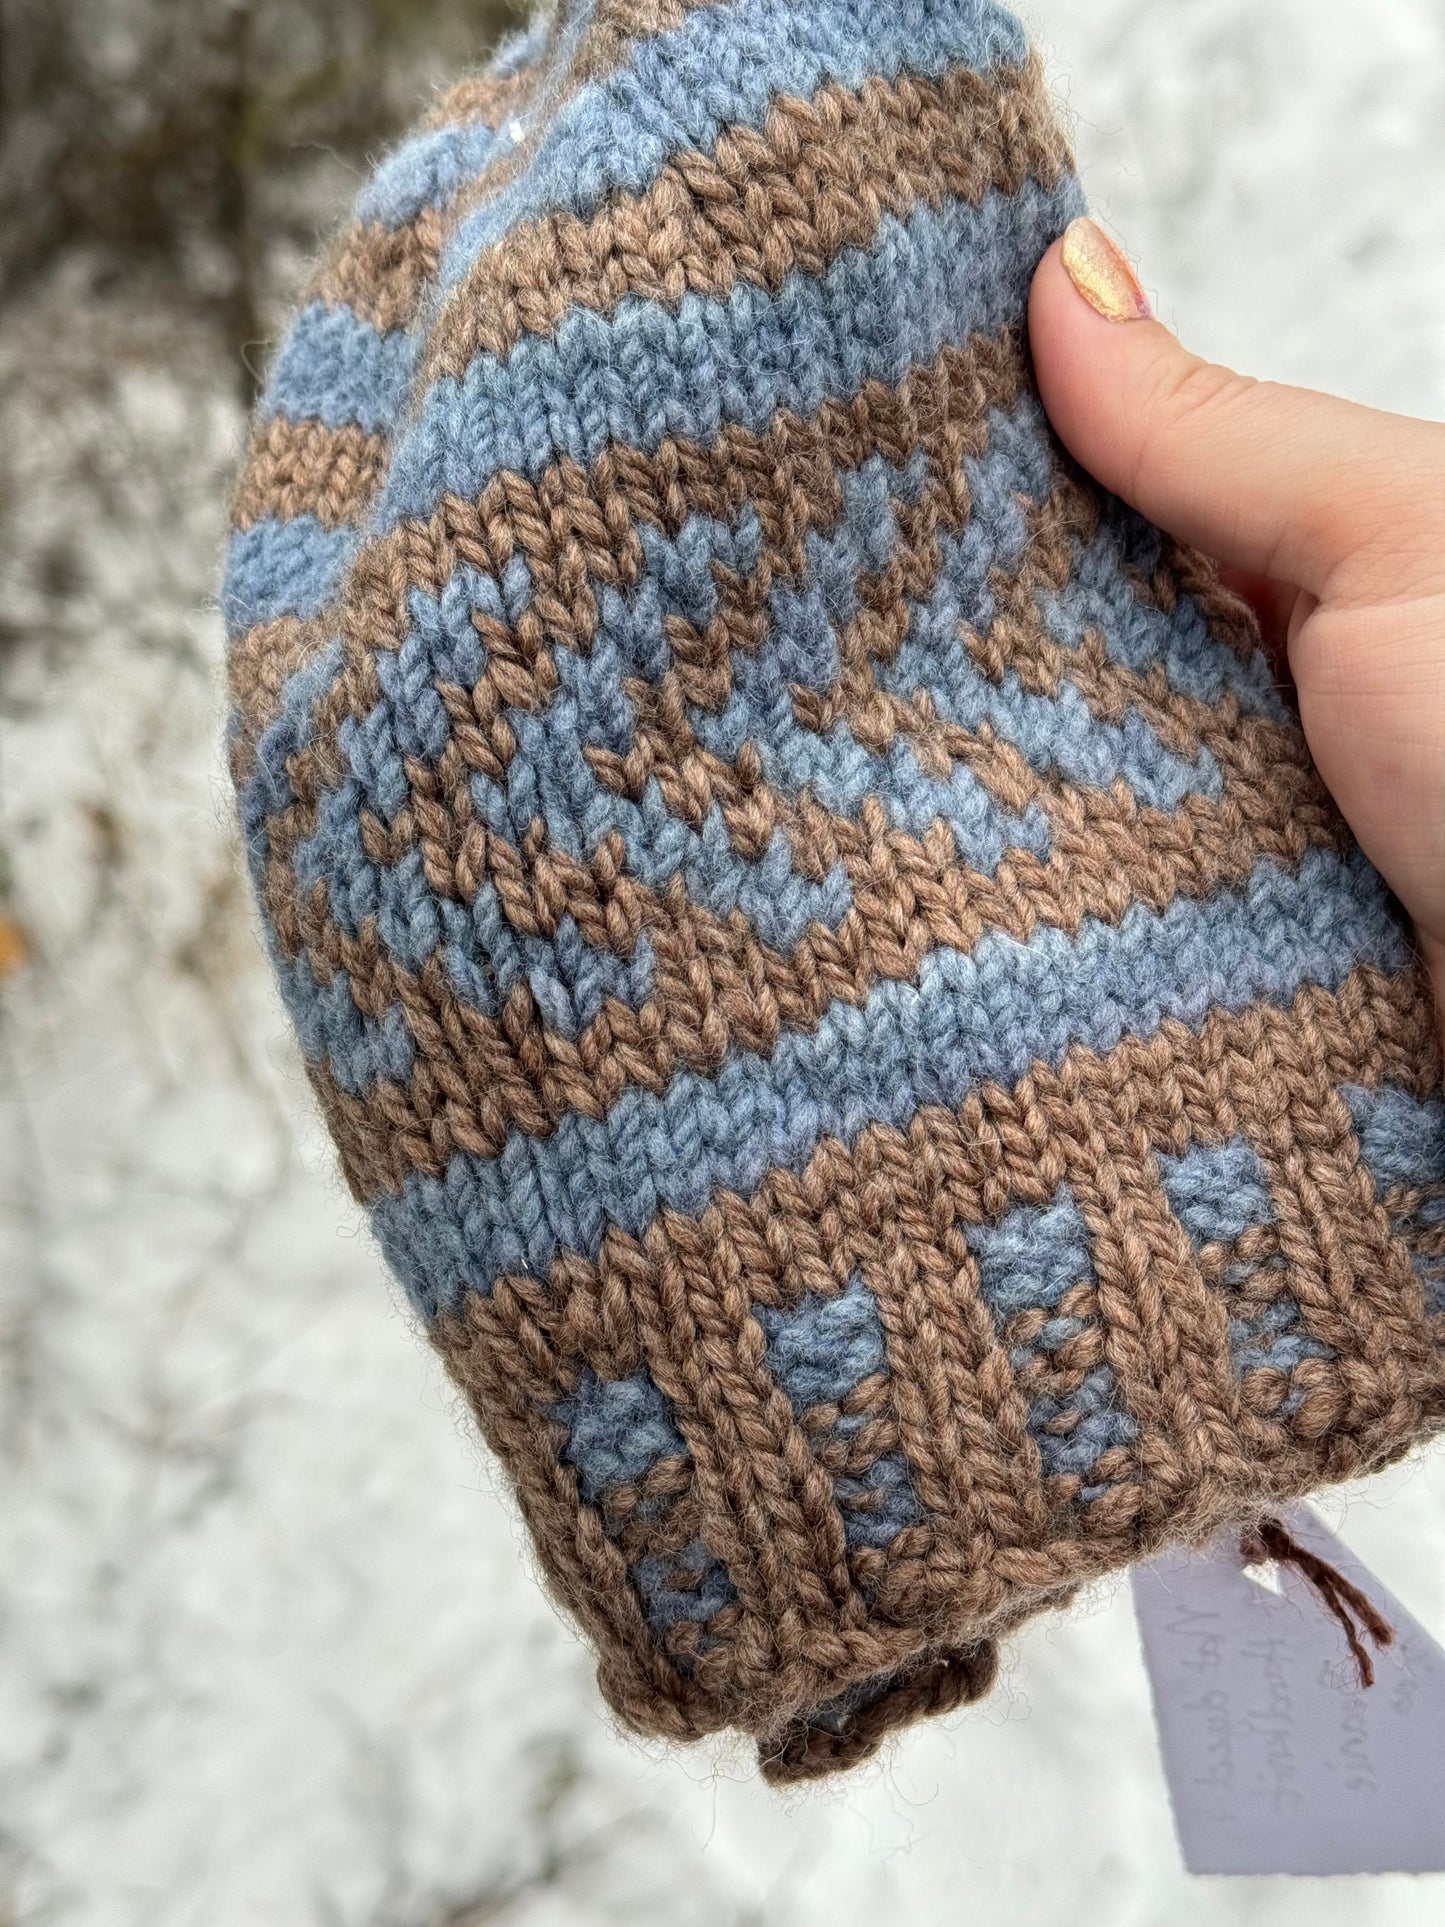 Naturally Dyed Wool Colorwork Hat